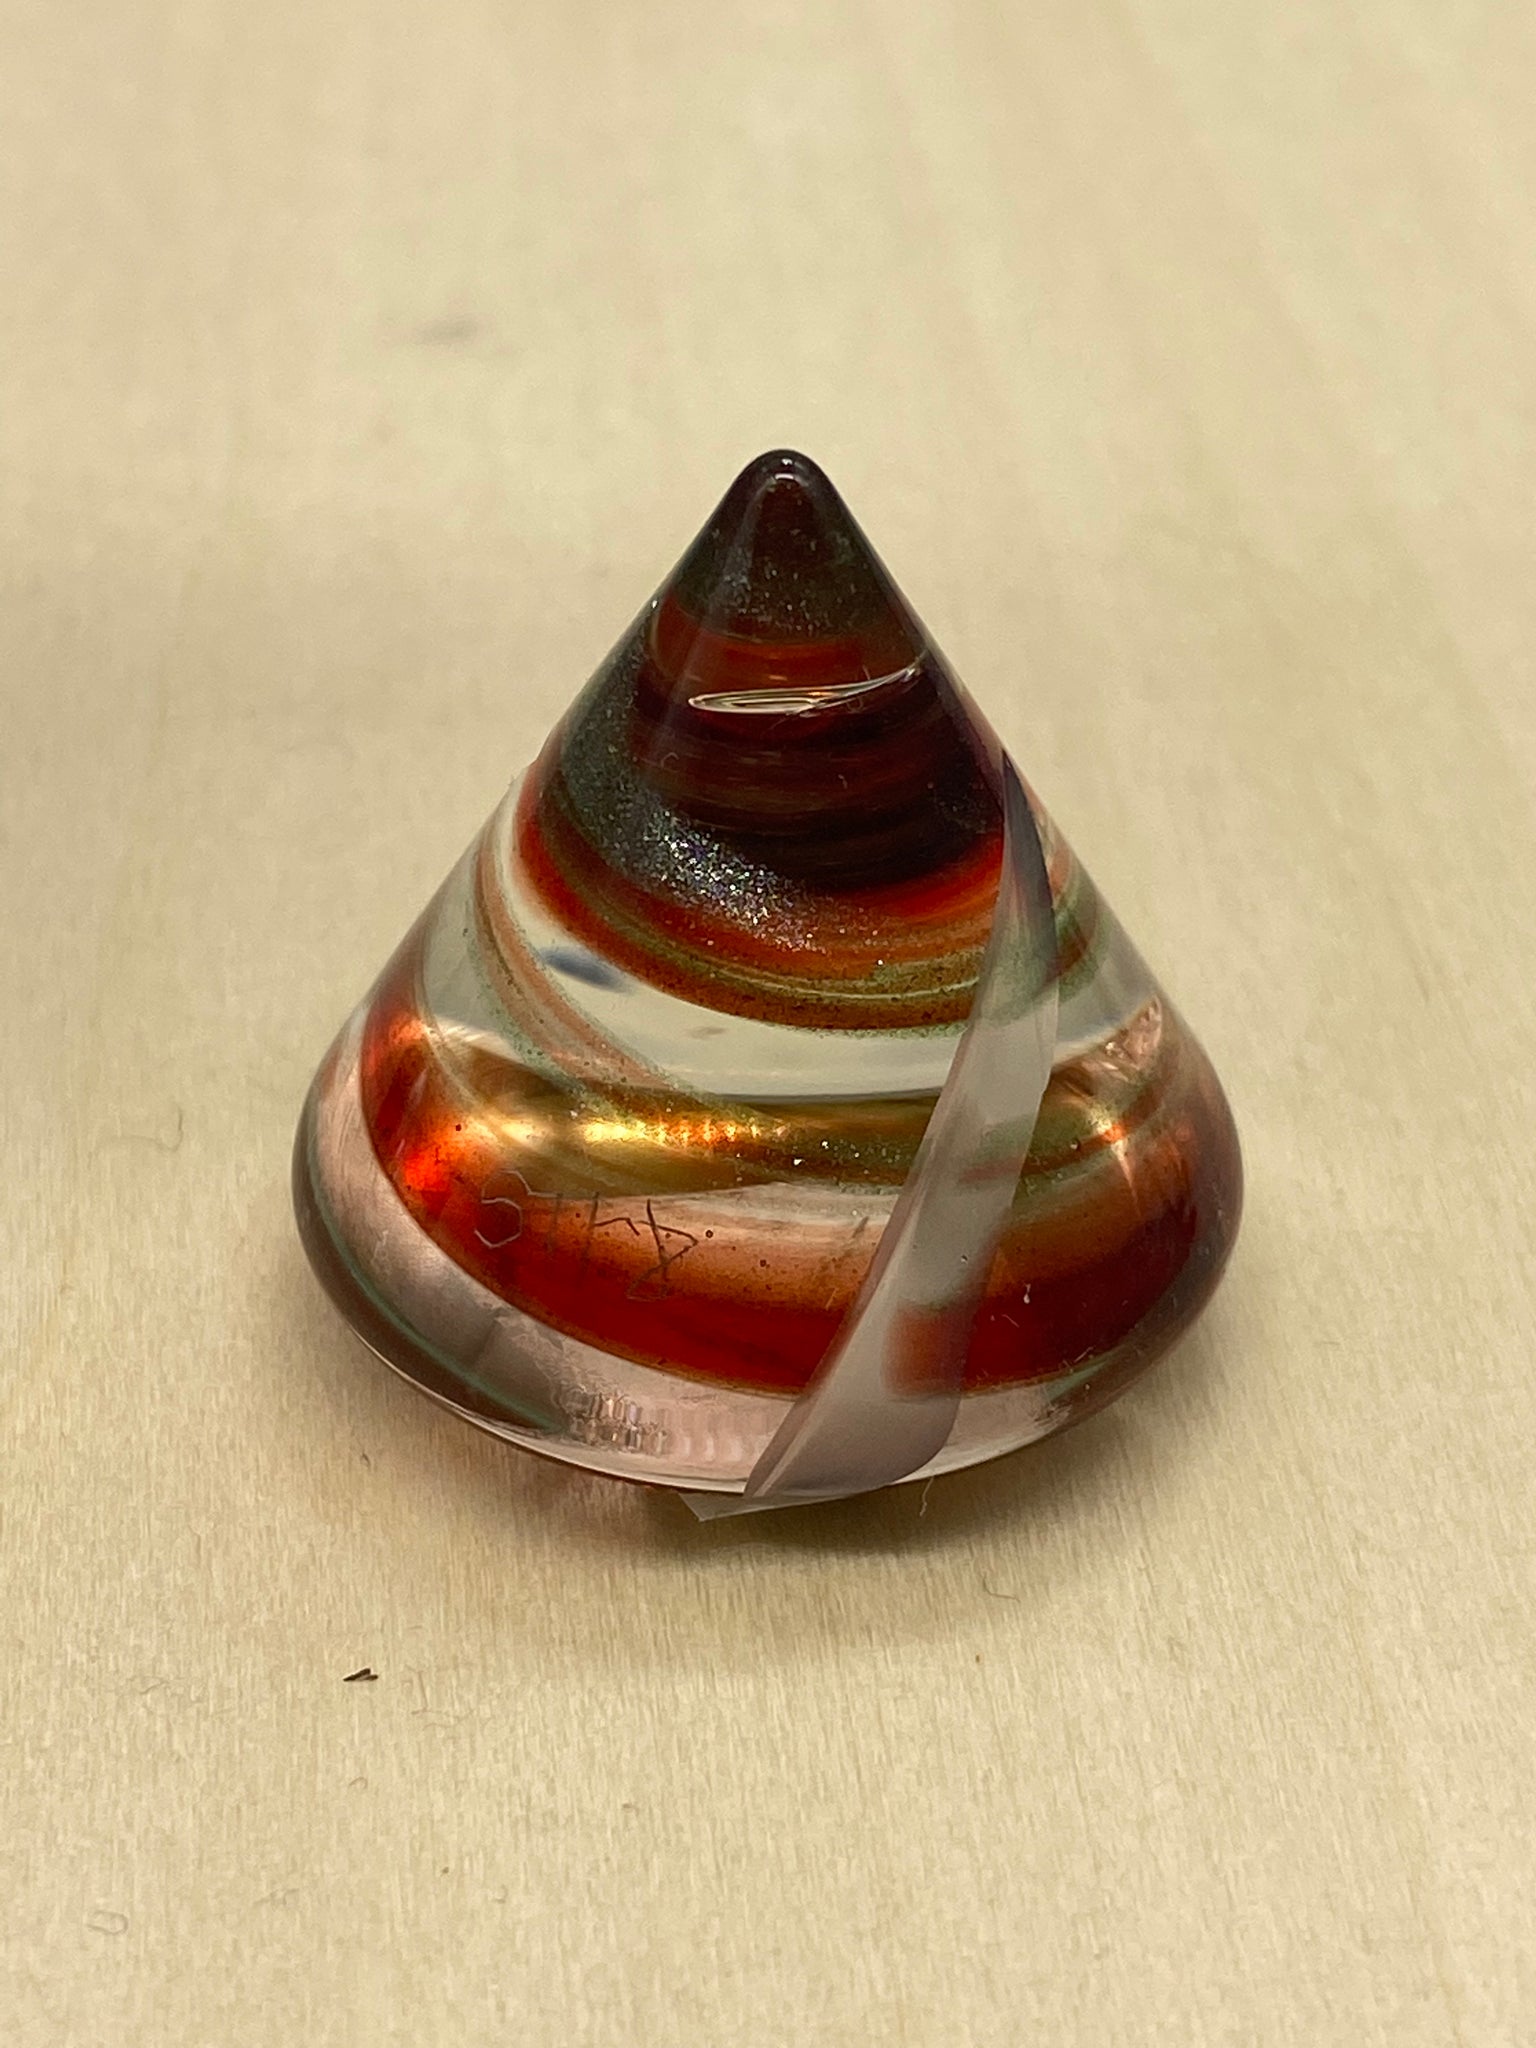 STR8 Glass cone spinner caps